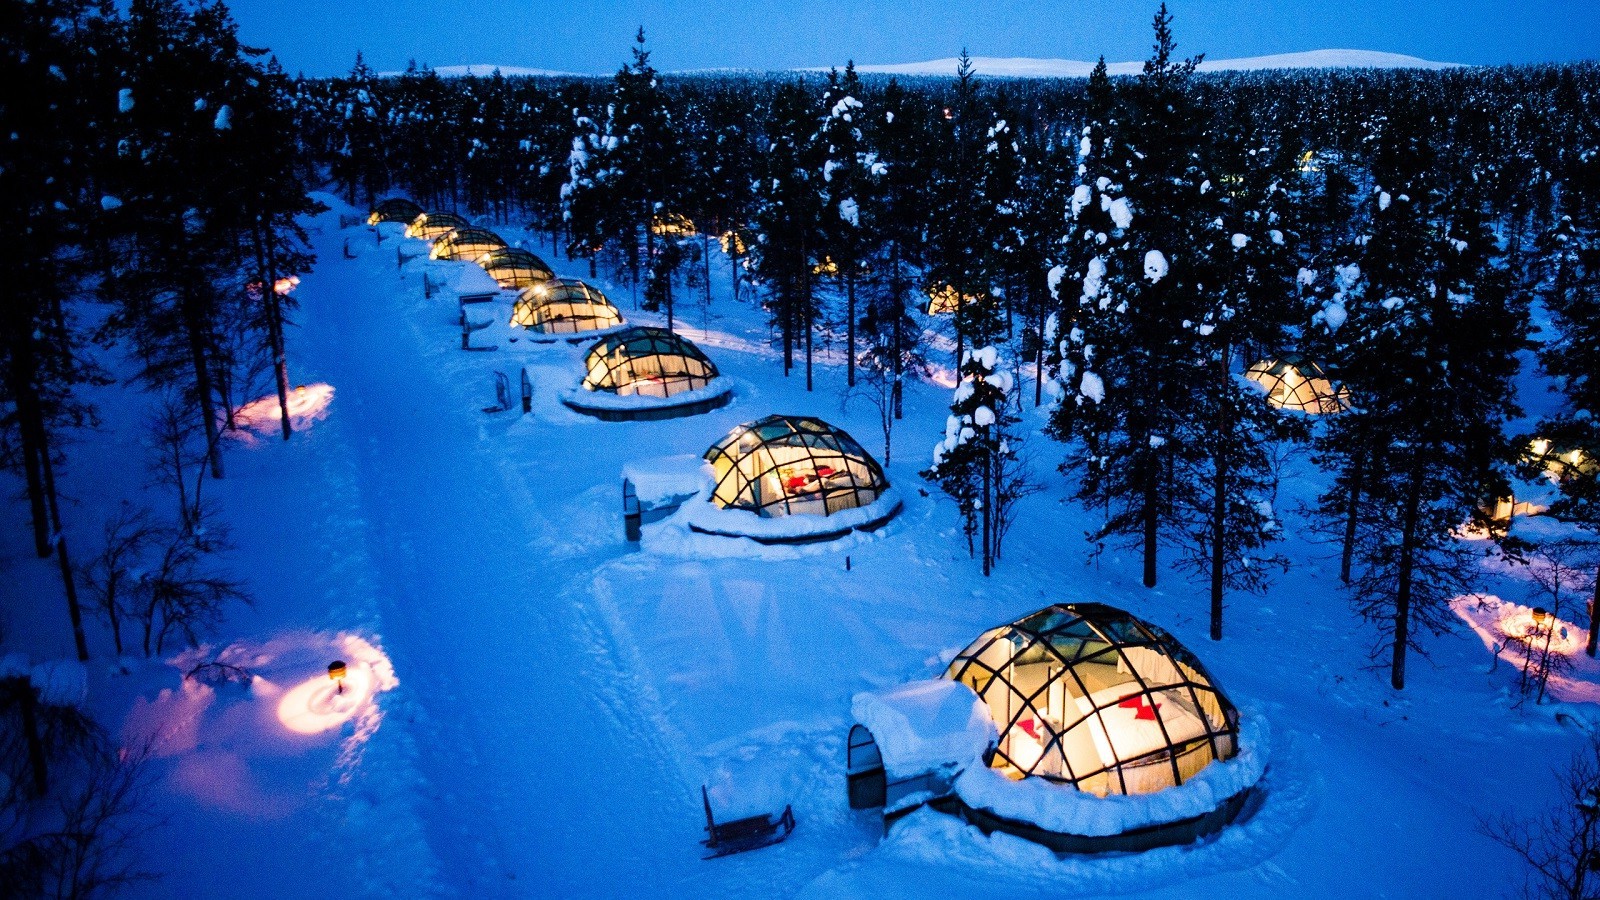 nature, Landscape, Trees, Forest, Winter, Snow, Evening, Lights, Igloo, Hotel, Modern, Pine Trees, Glass, Bed, Lapland, Finland, Romantic Wallpaper